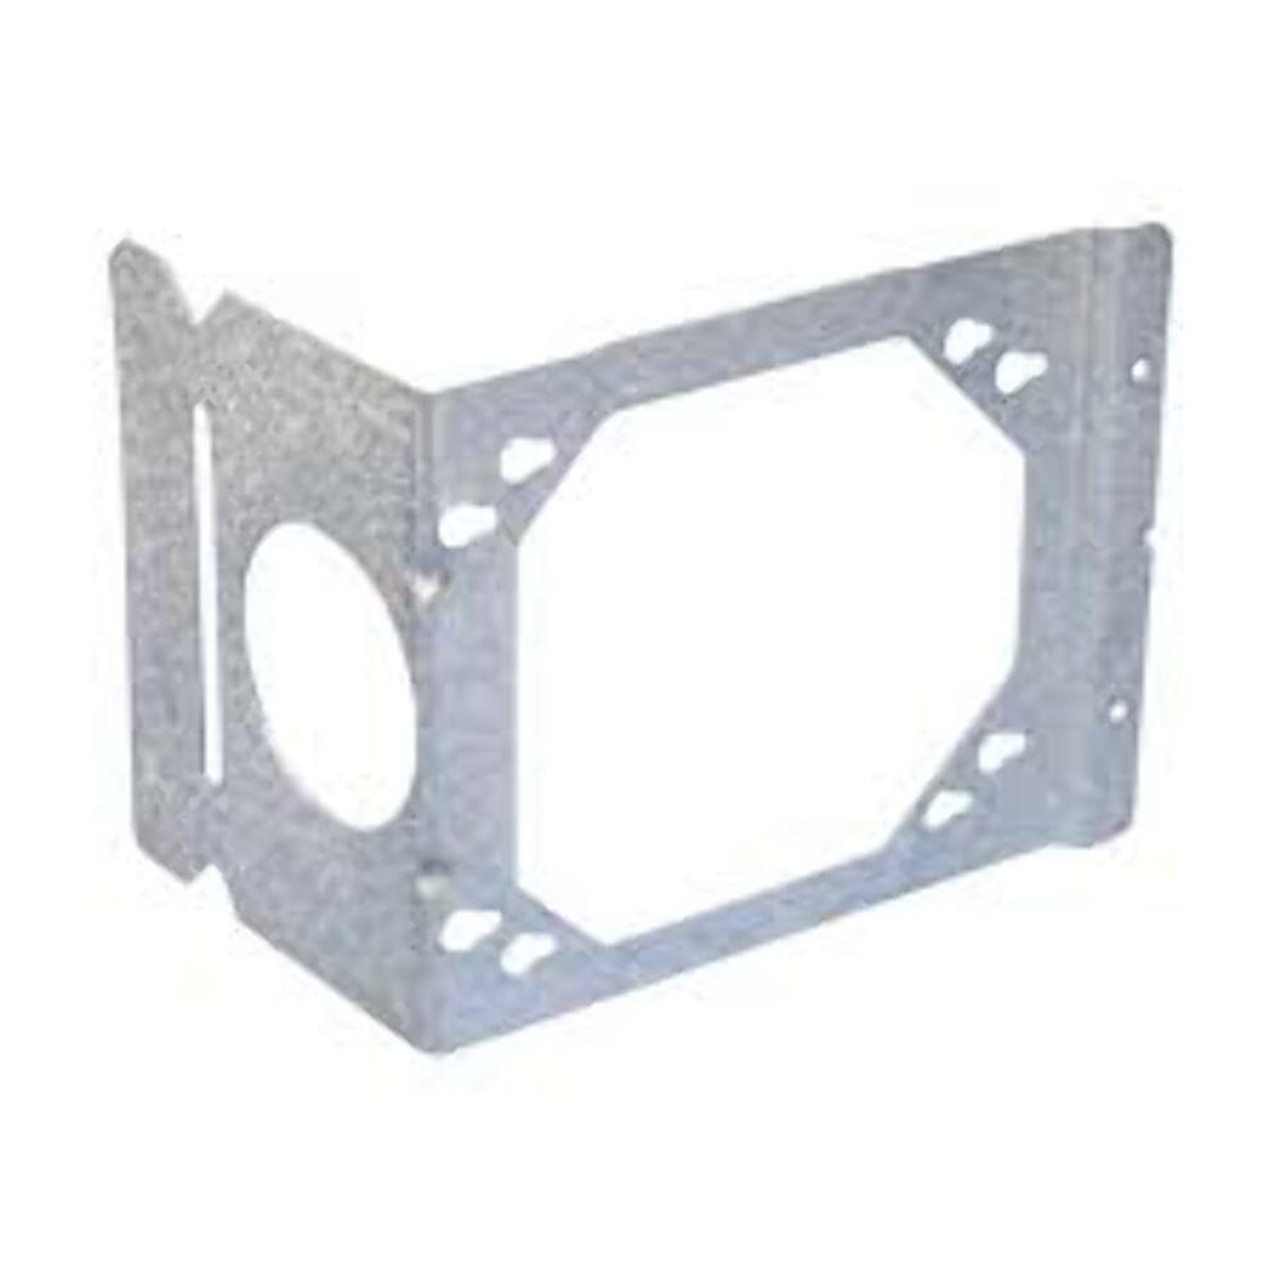 Eaton BB4-4 Mounting Bracket For 4 Inch, 3-1/2 Inch, and 2-1/2 Inch STUD